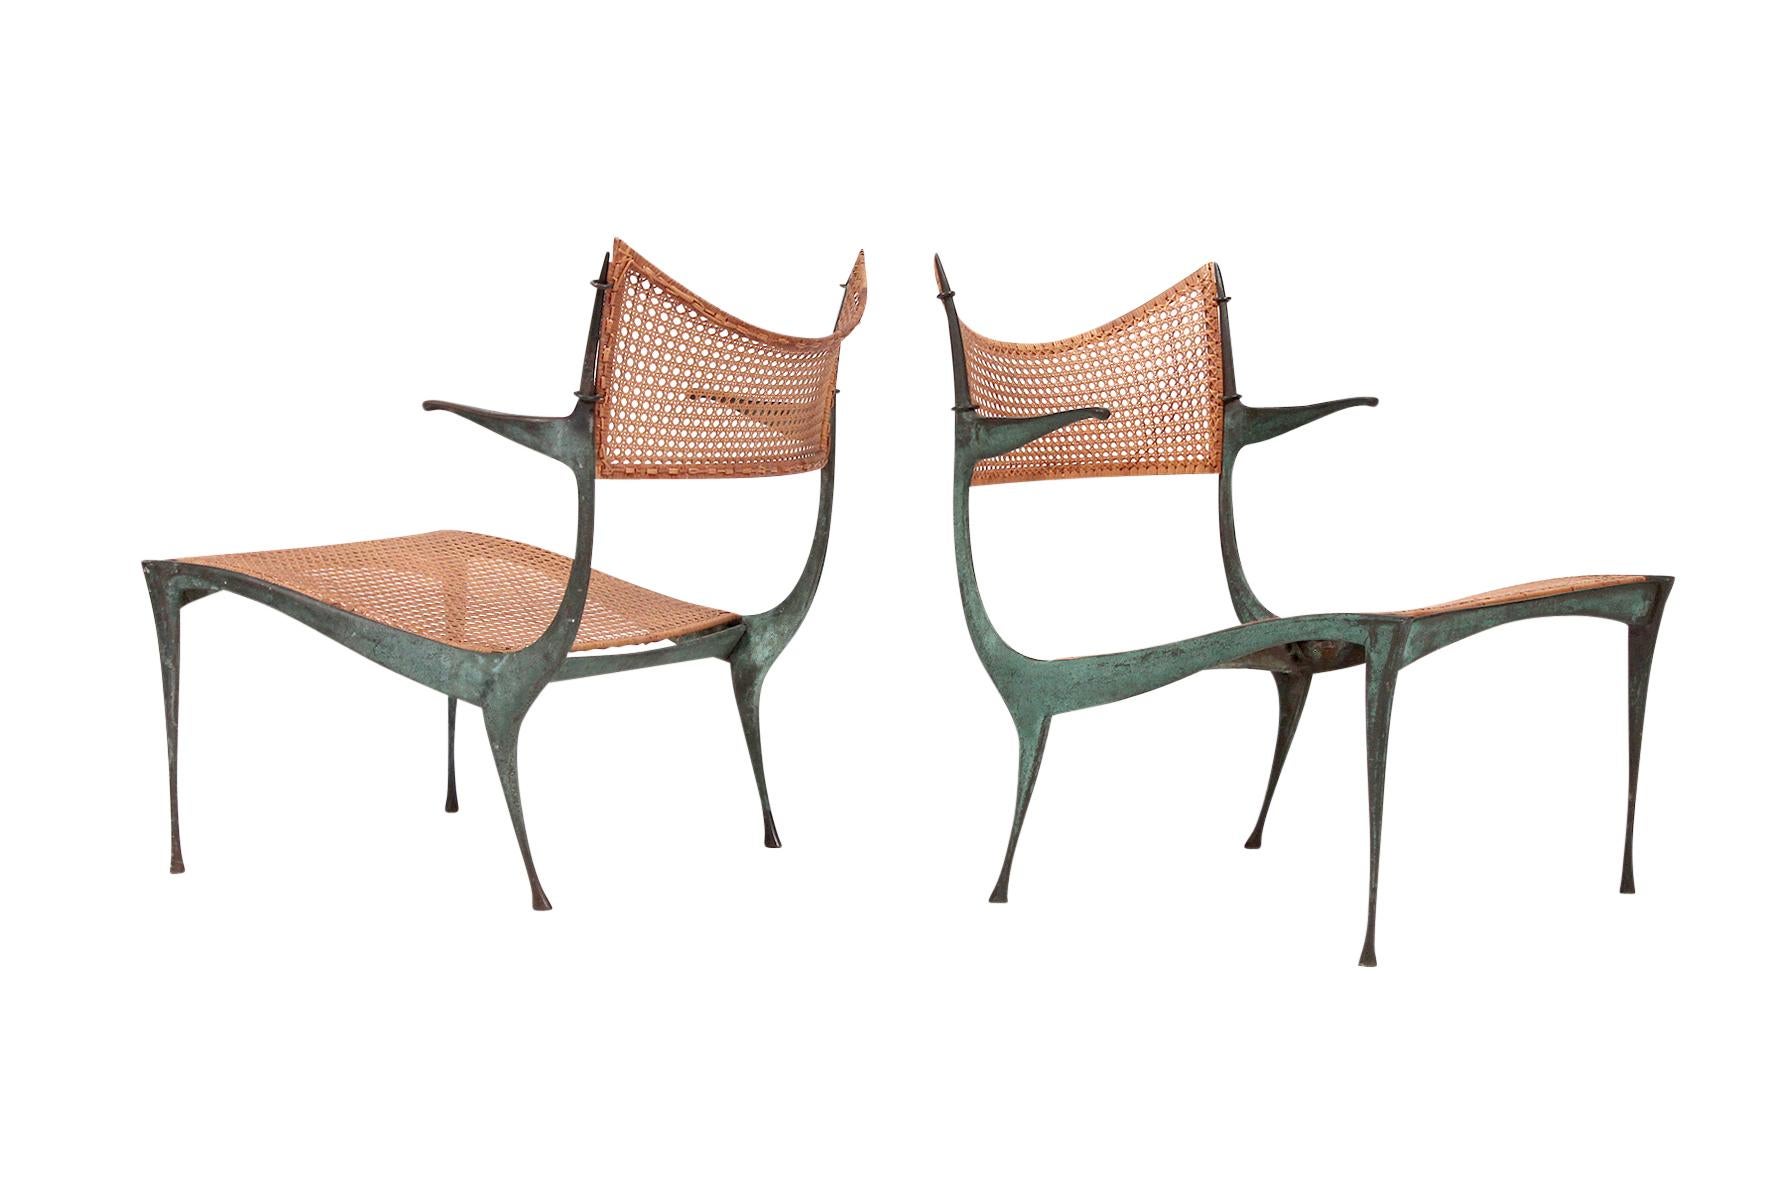 Rare pair of Dan Johnson Gazelle lounge chairs in beautifully patinated bronze and cane. Very rare matched pair in very good condition.